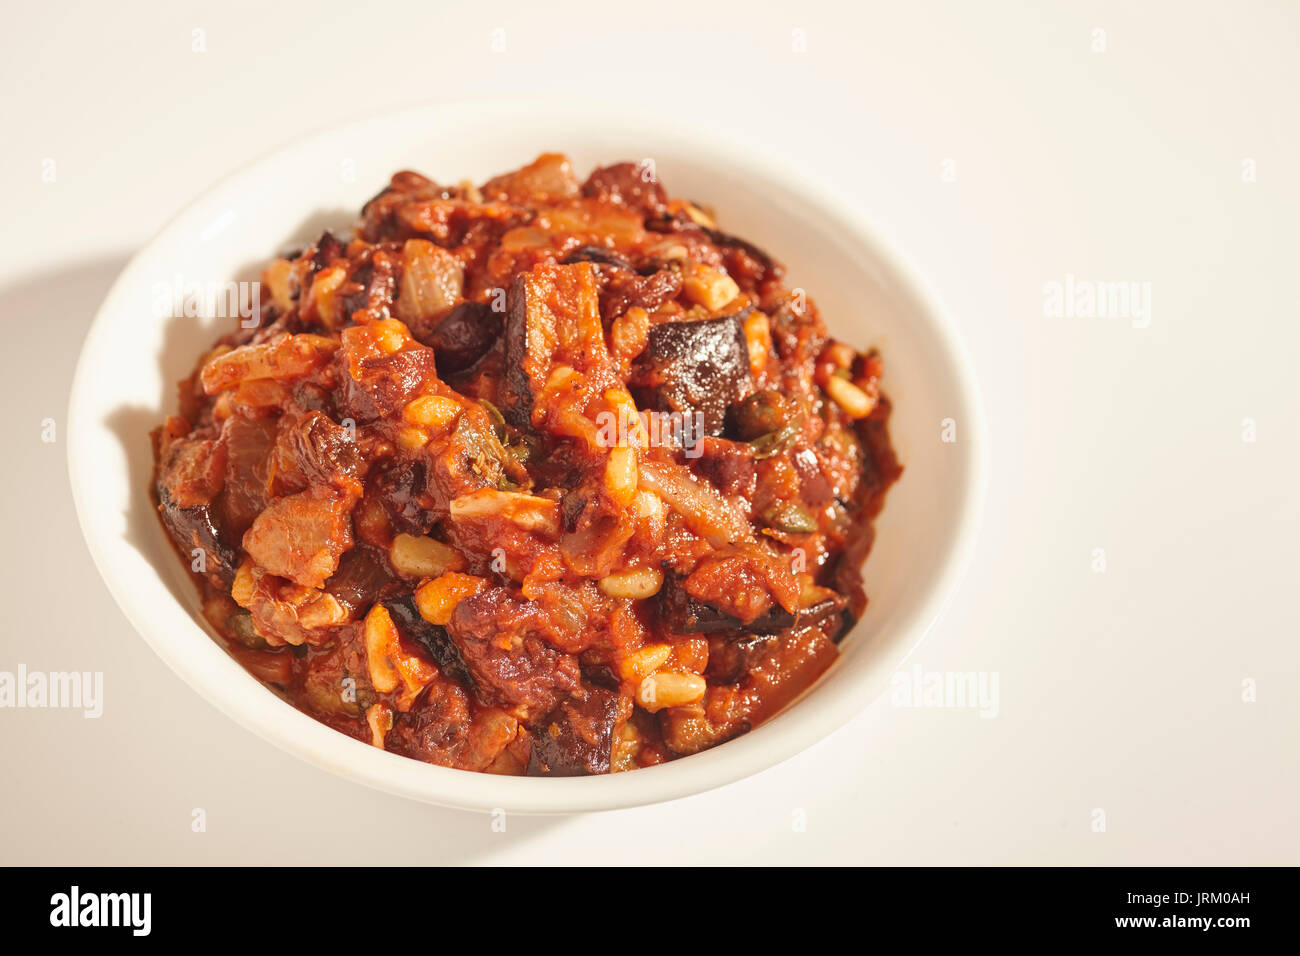 Caponata, a stew of eggplant, tomato, raisins and pine nuts, from Sicily, Italy Stock Photo